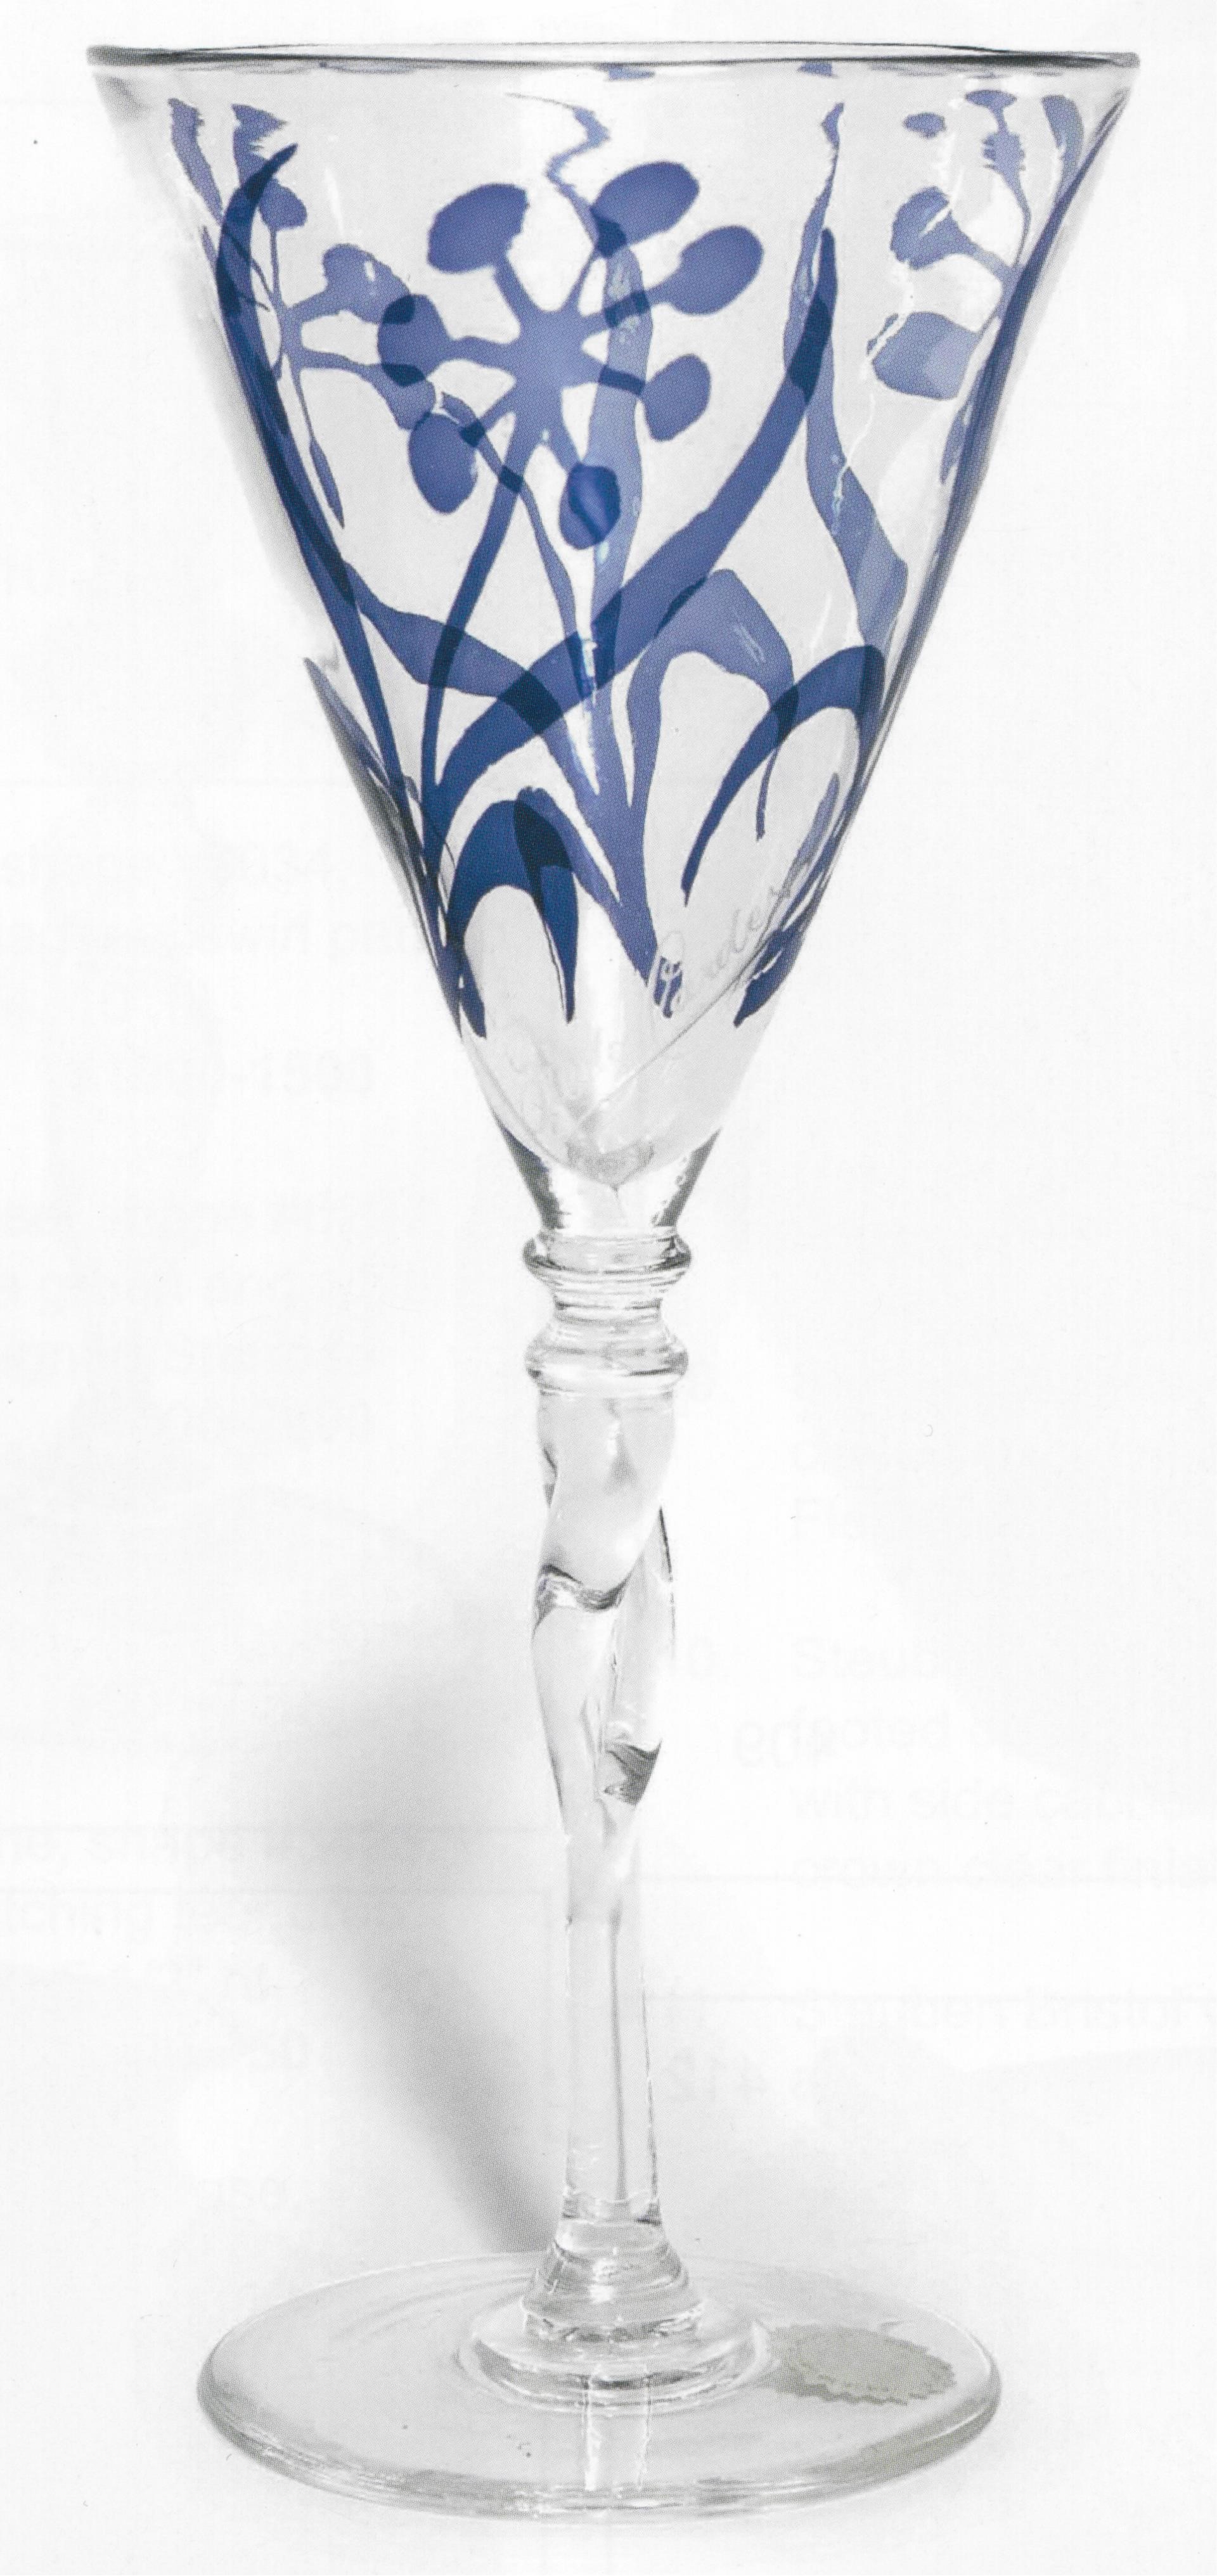 0000 - Colorless Intarsia Goblet